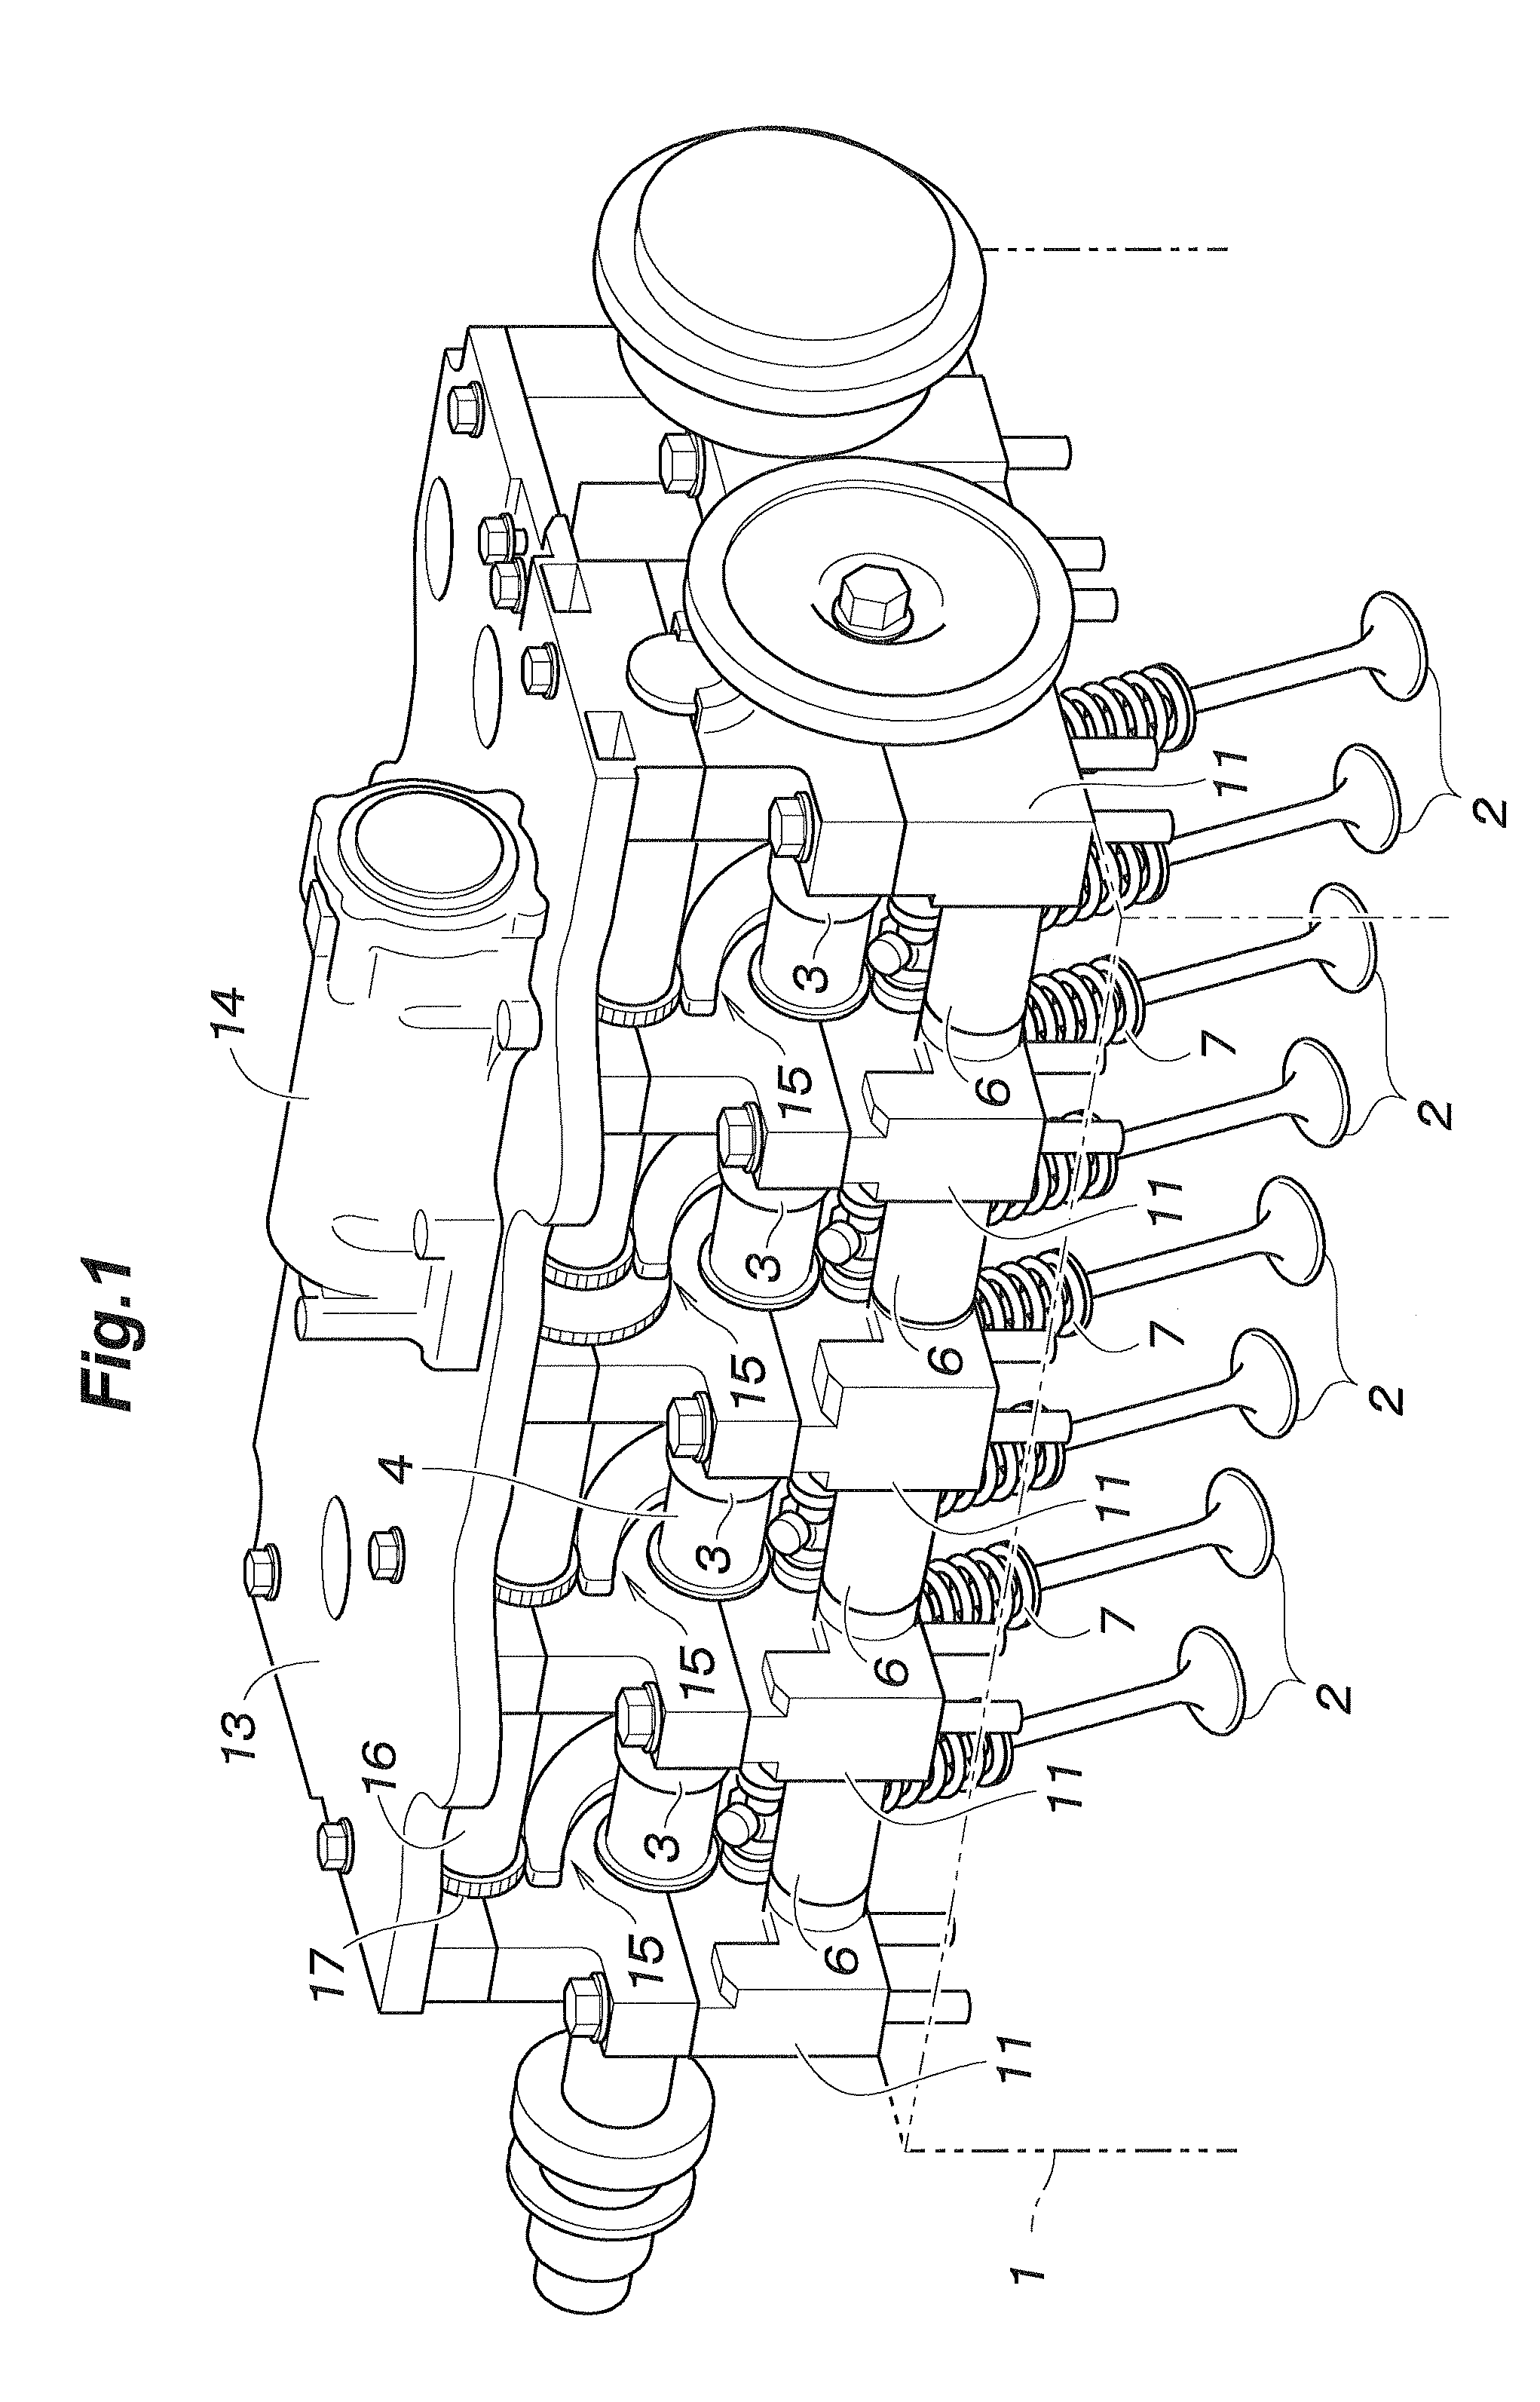 Variable valve opening property internal combustion engine